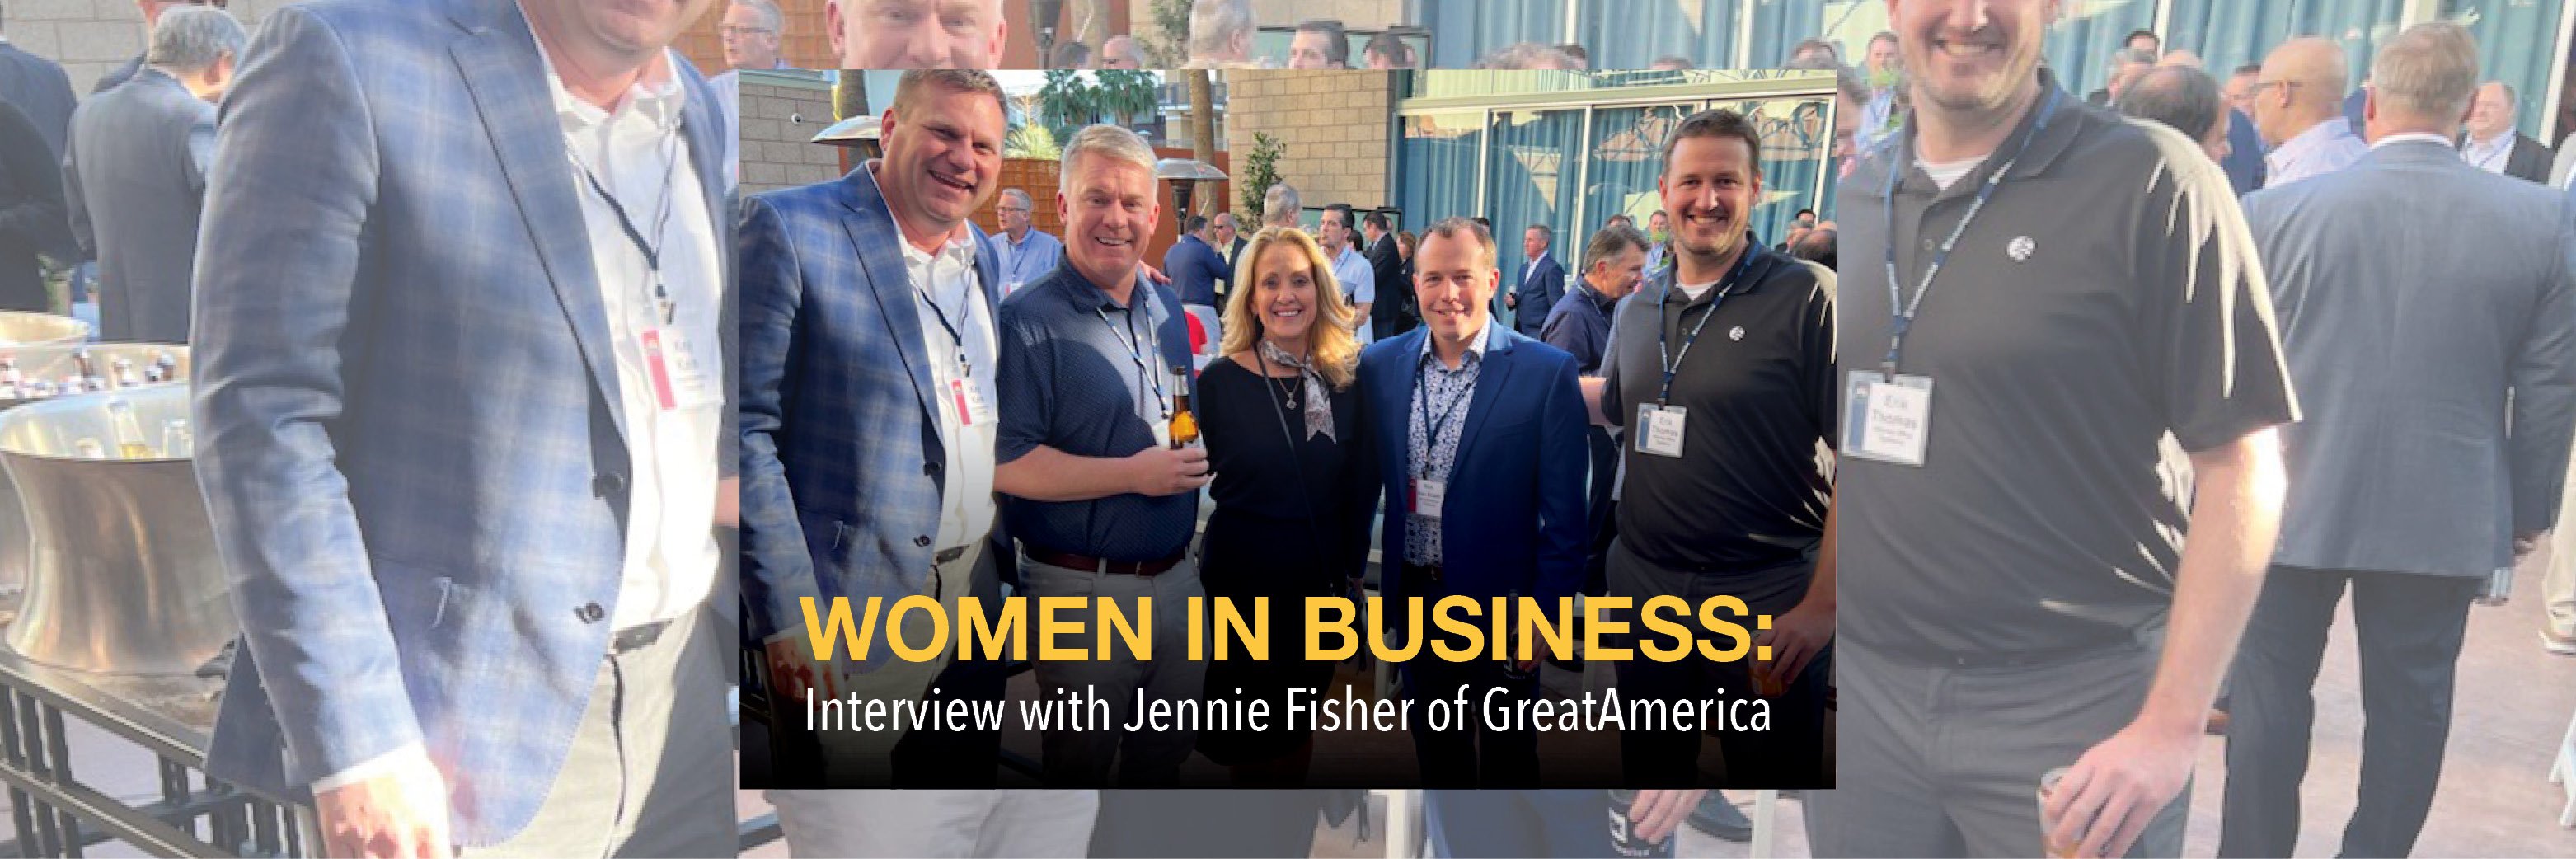 Women in Business: Interviewing Jennie Fisher of GreatAmerica